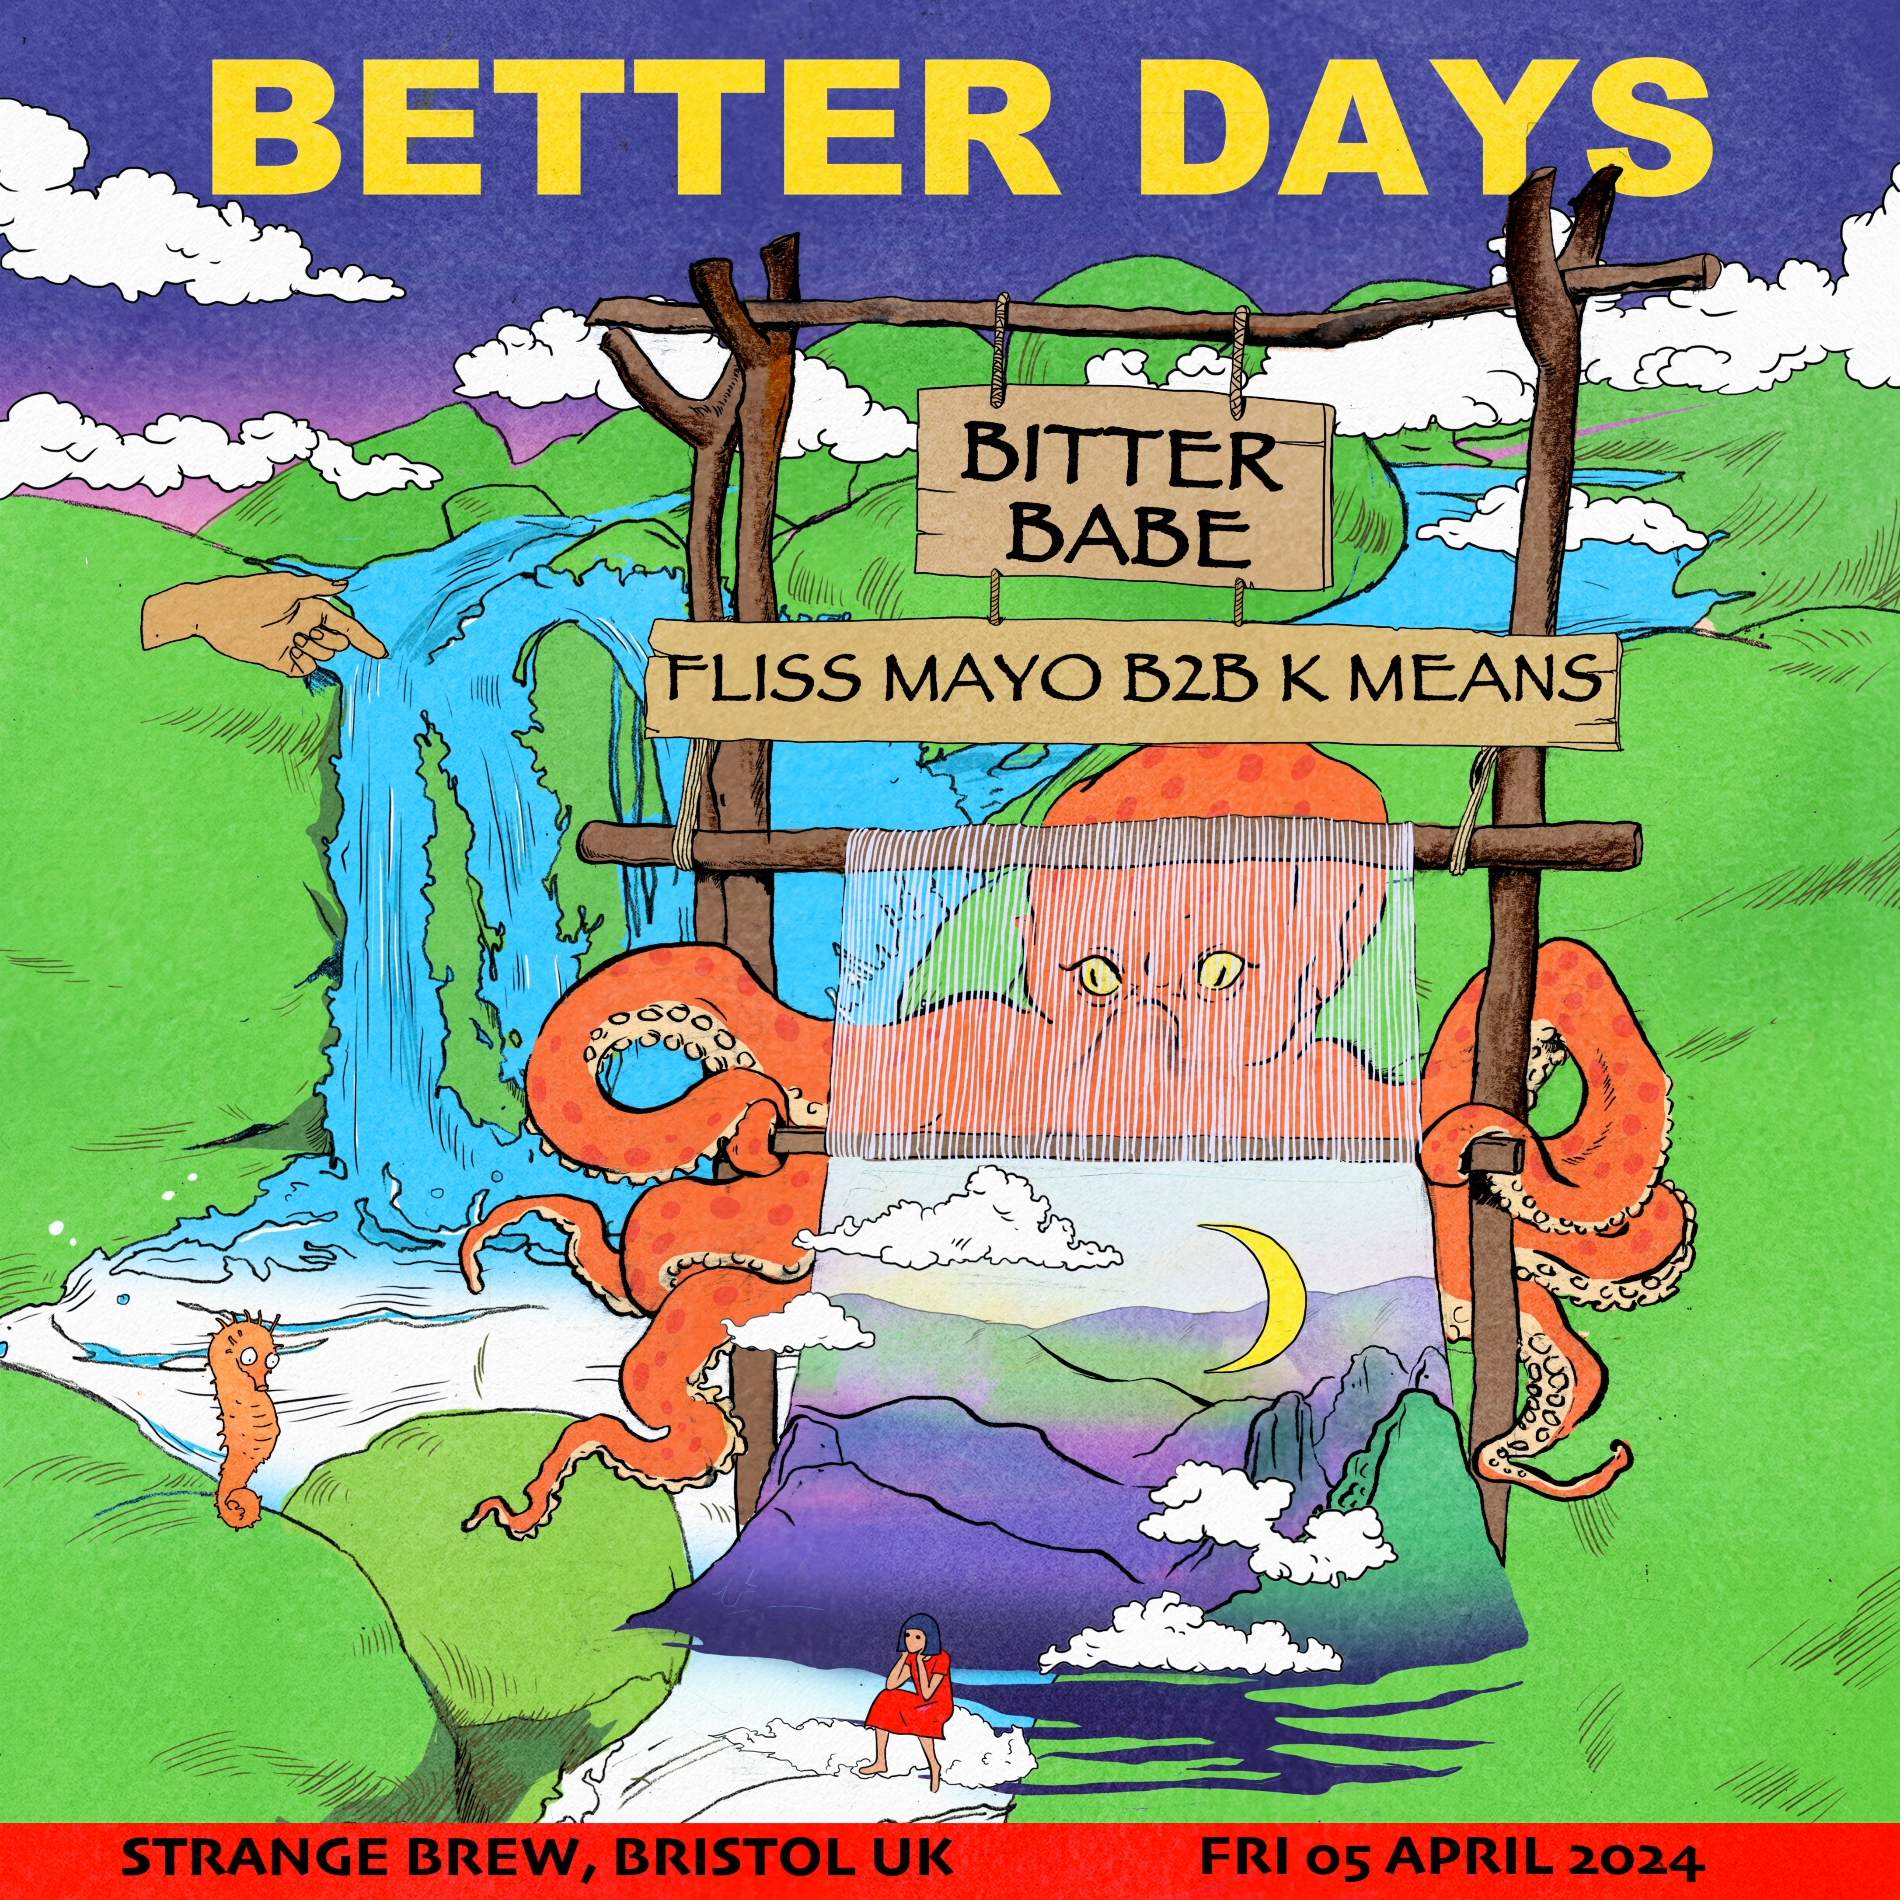 Better Days with Bitter Babe and Fliss Mayo b2b k means - フライヤー表